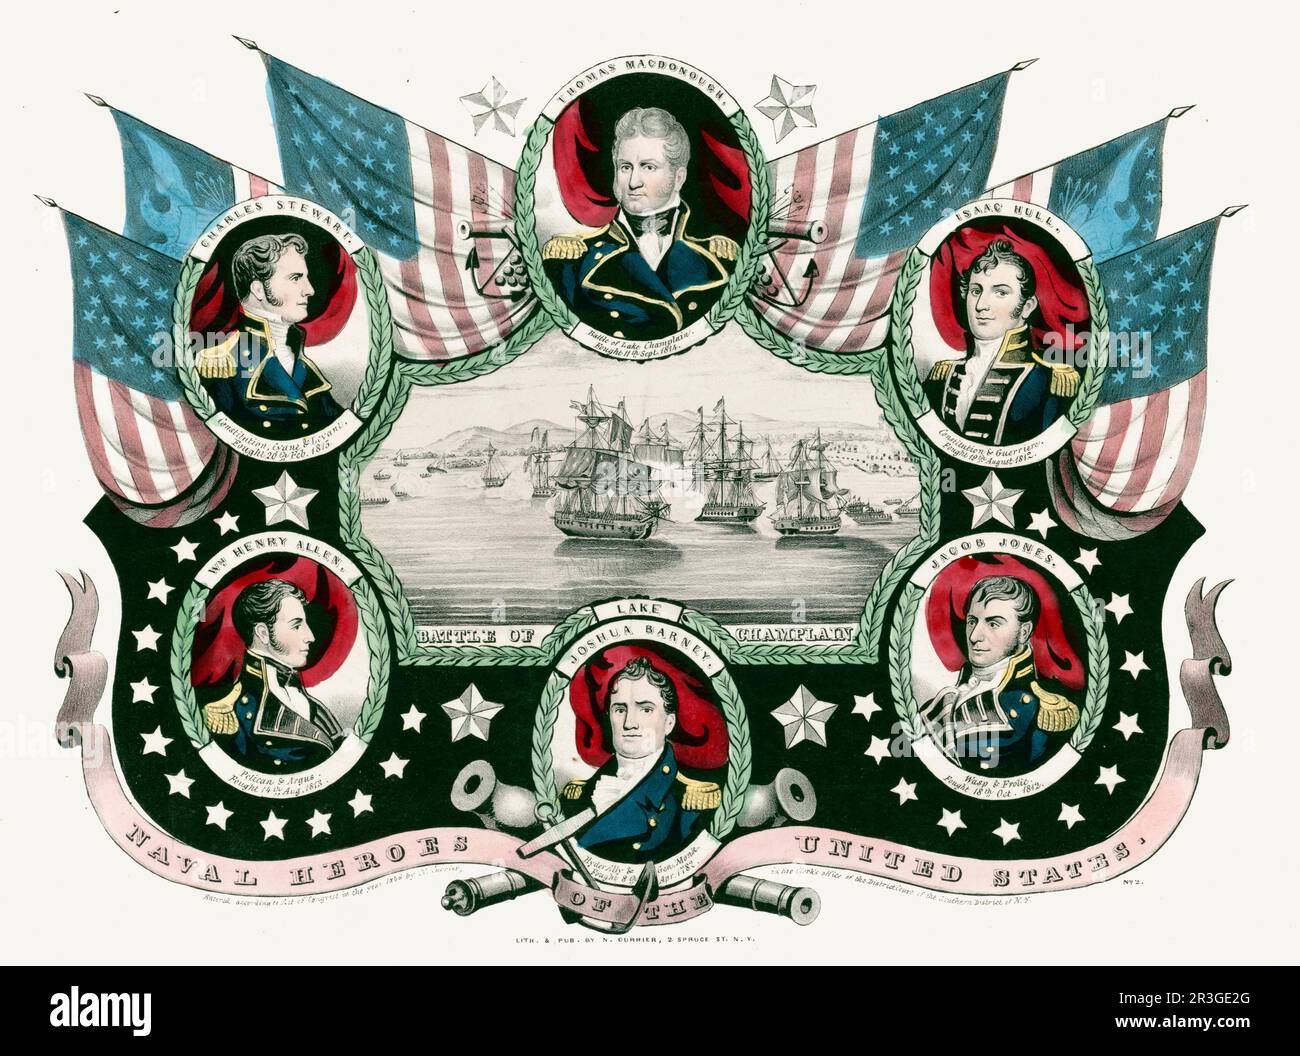 Portraits of War of 1812 American naval officers surrounding a vignette of the Battle of Lake Champlain. Stock Photo